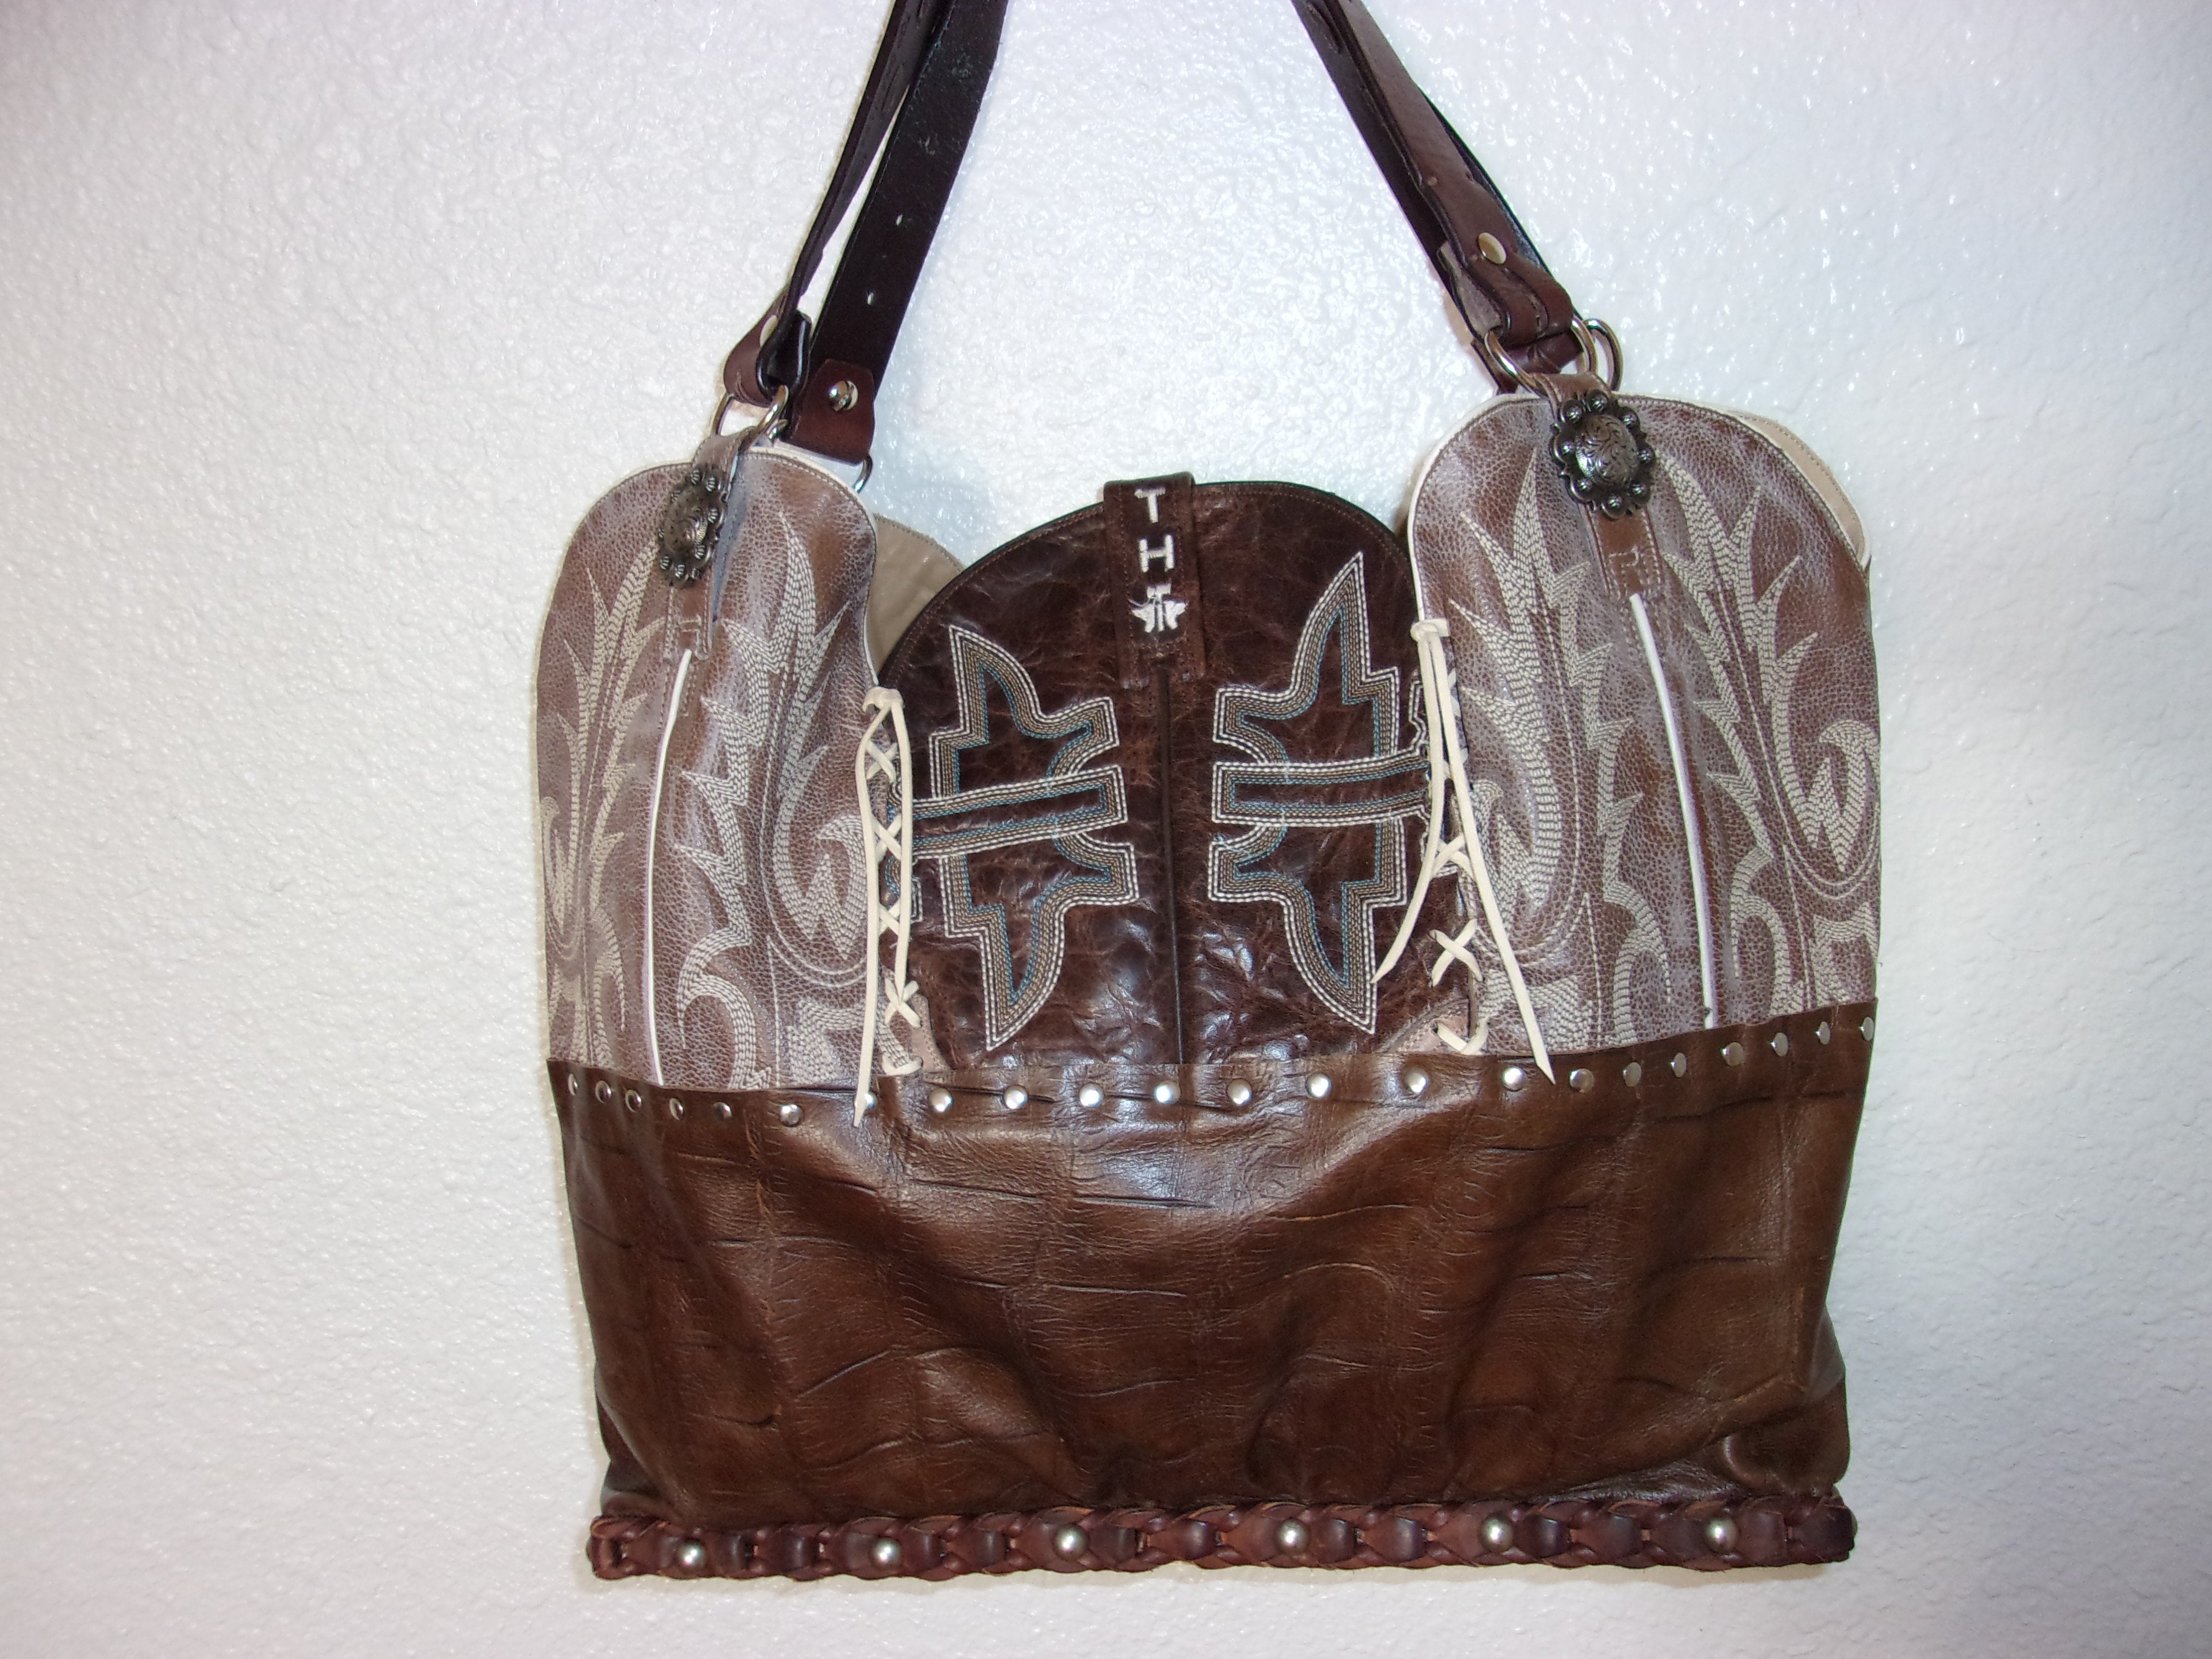 Western Laptop Tote - Extra Large Cowboy Boot Purse - Western Travel Bag LT23 cowboy boot purses, western fringe purse, handmade leather purses, boot purse, handmade western purse, custom leather handbags Chris Thompson Bags